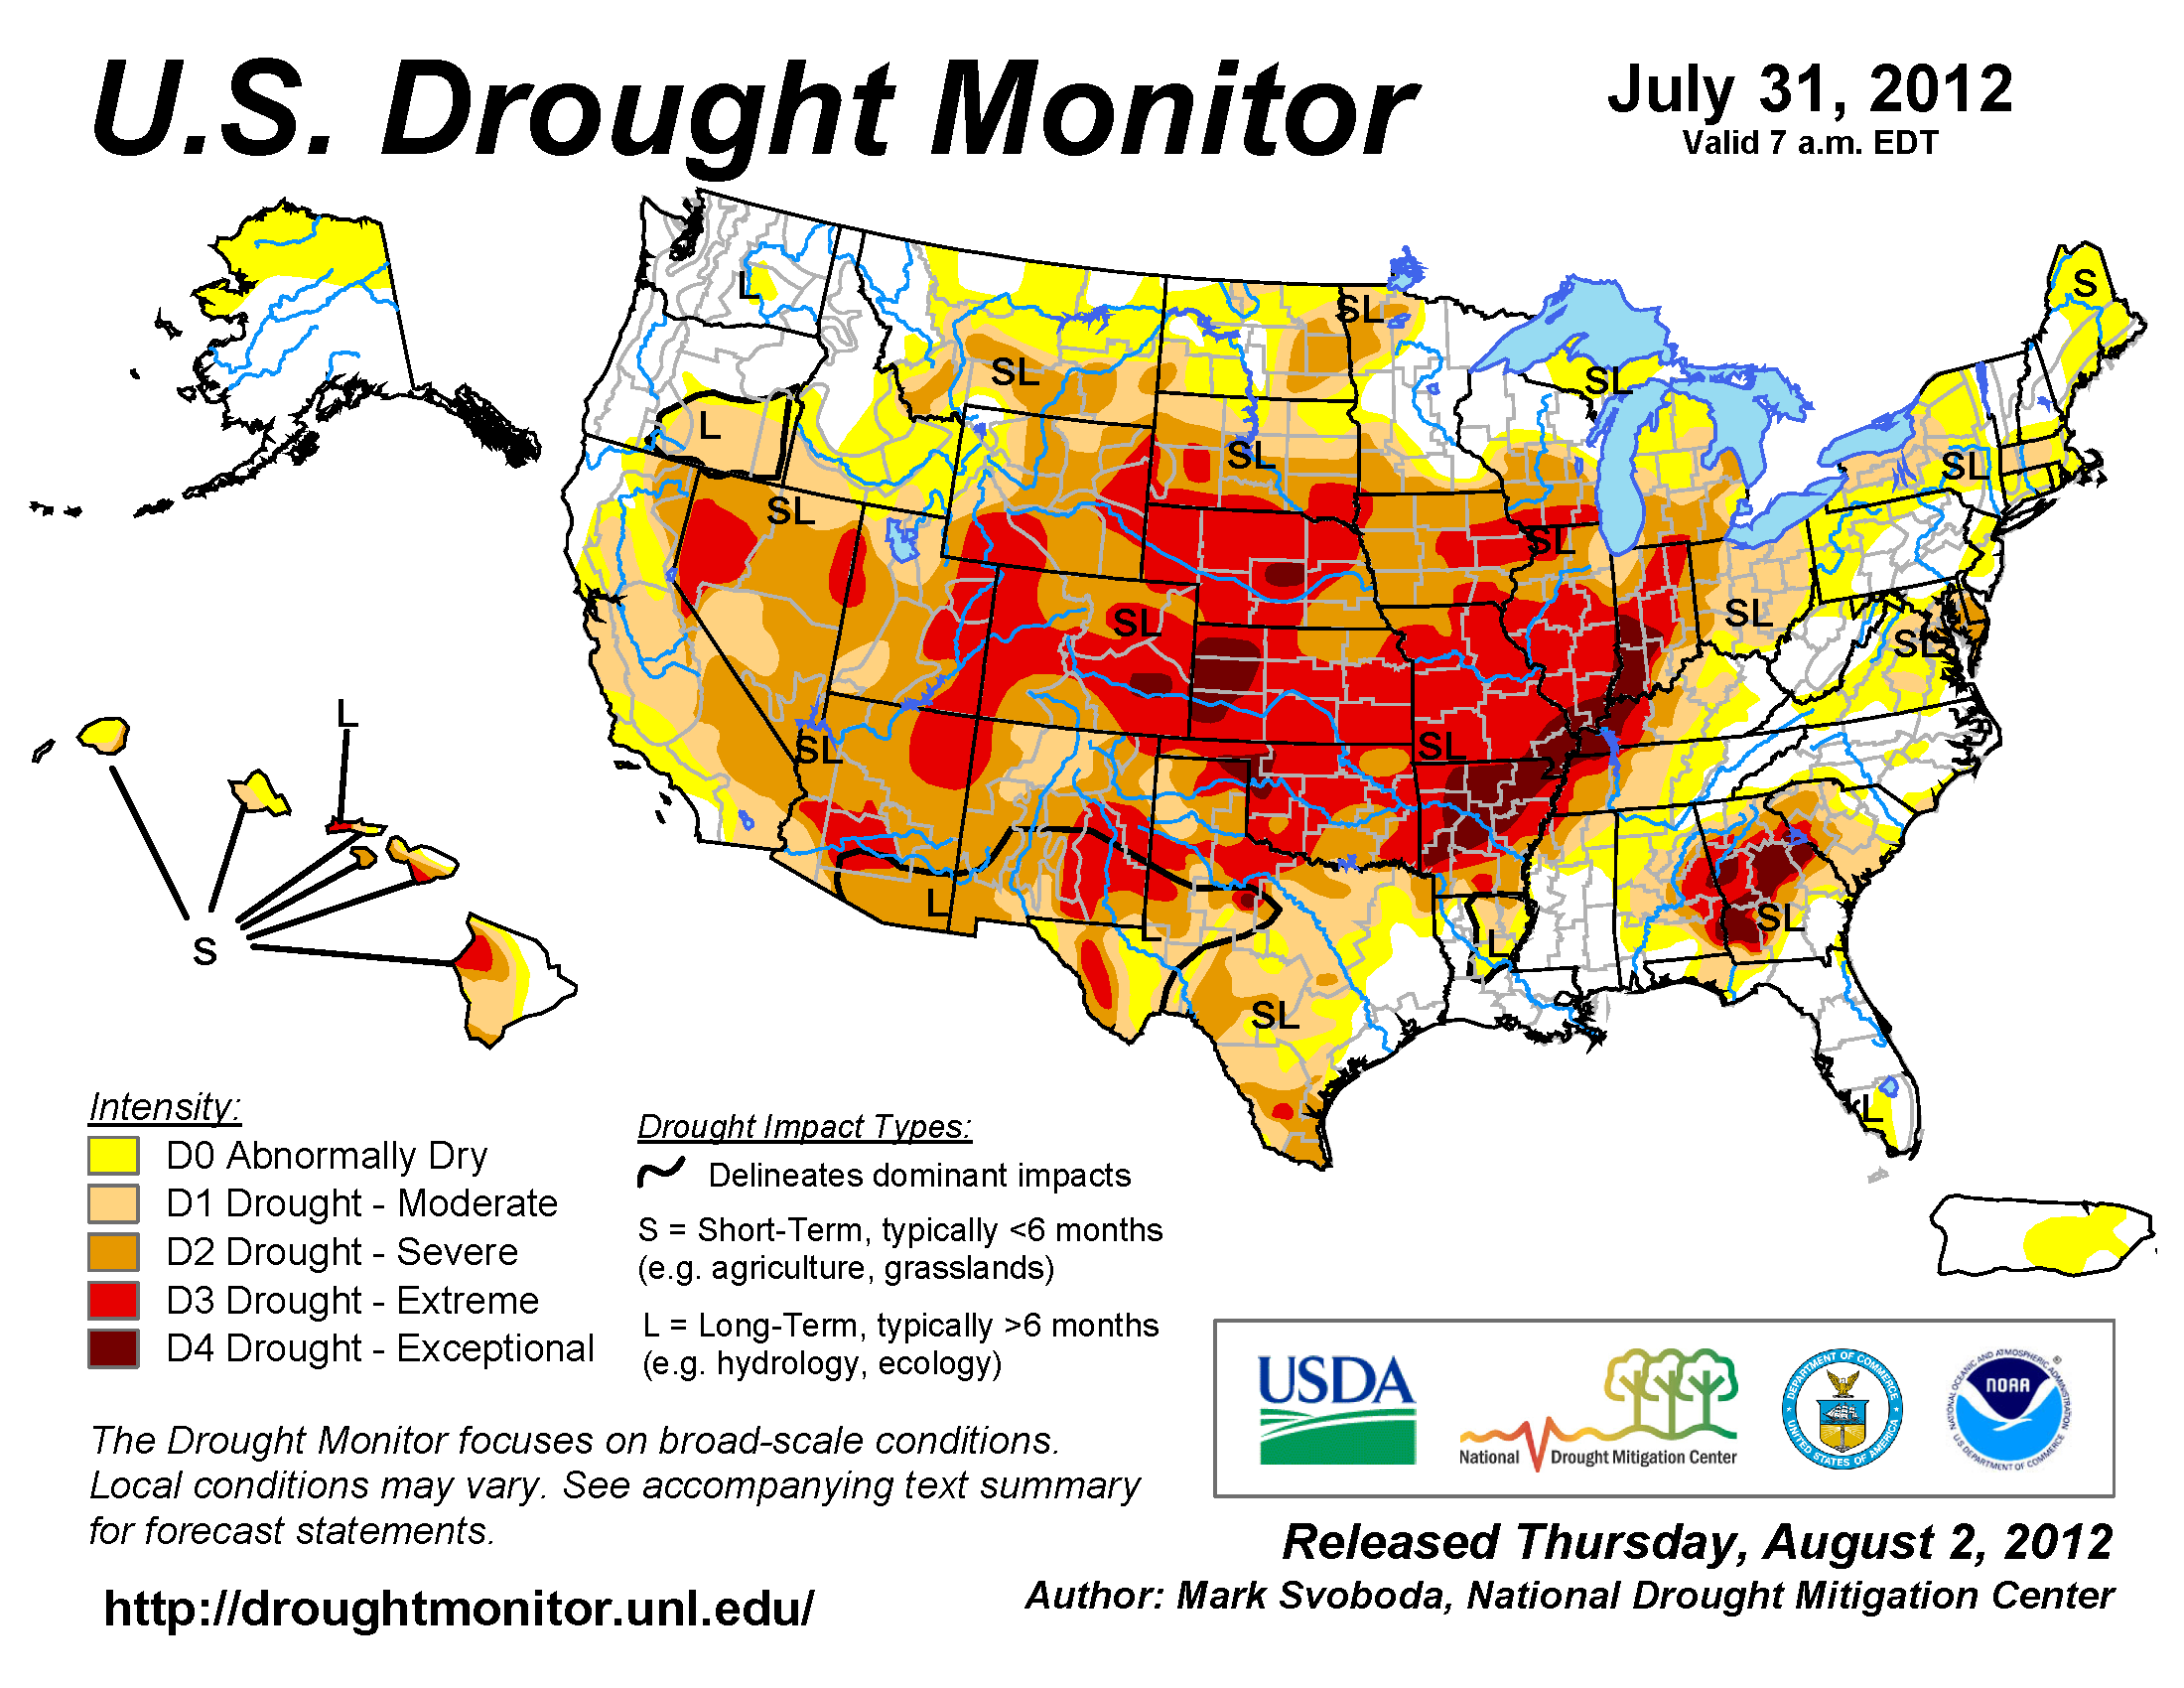 U.S. Drought Monitor map from 31 July 2012